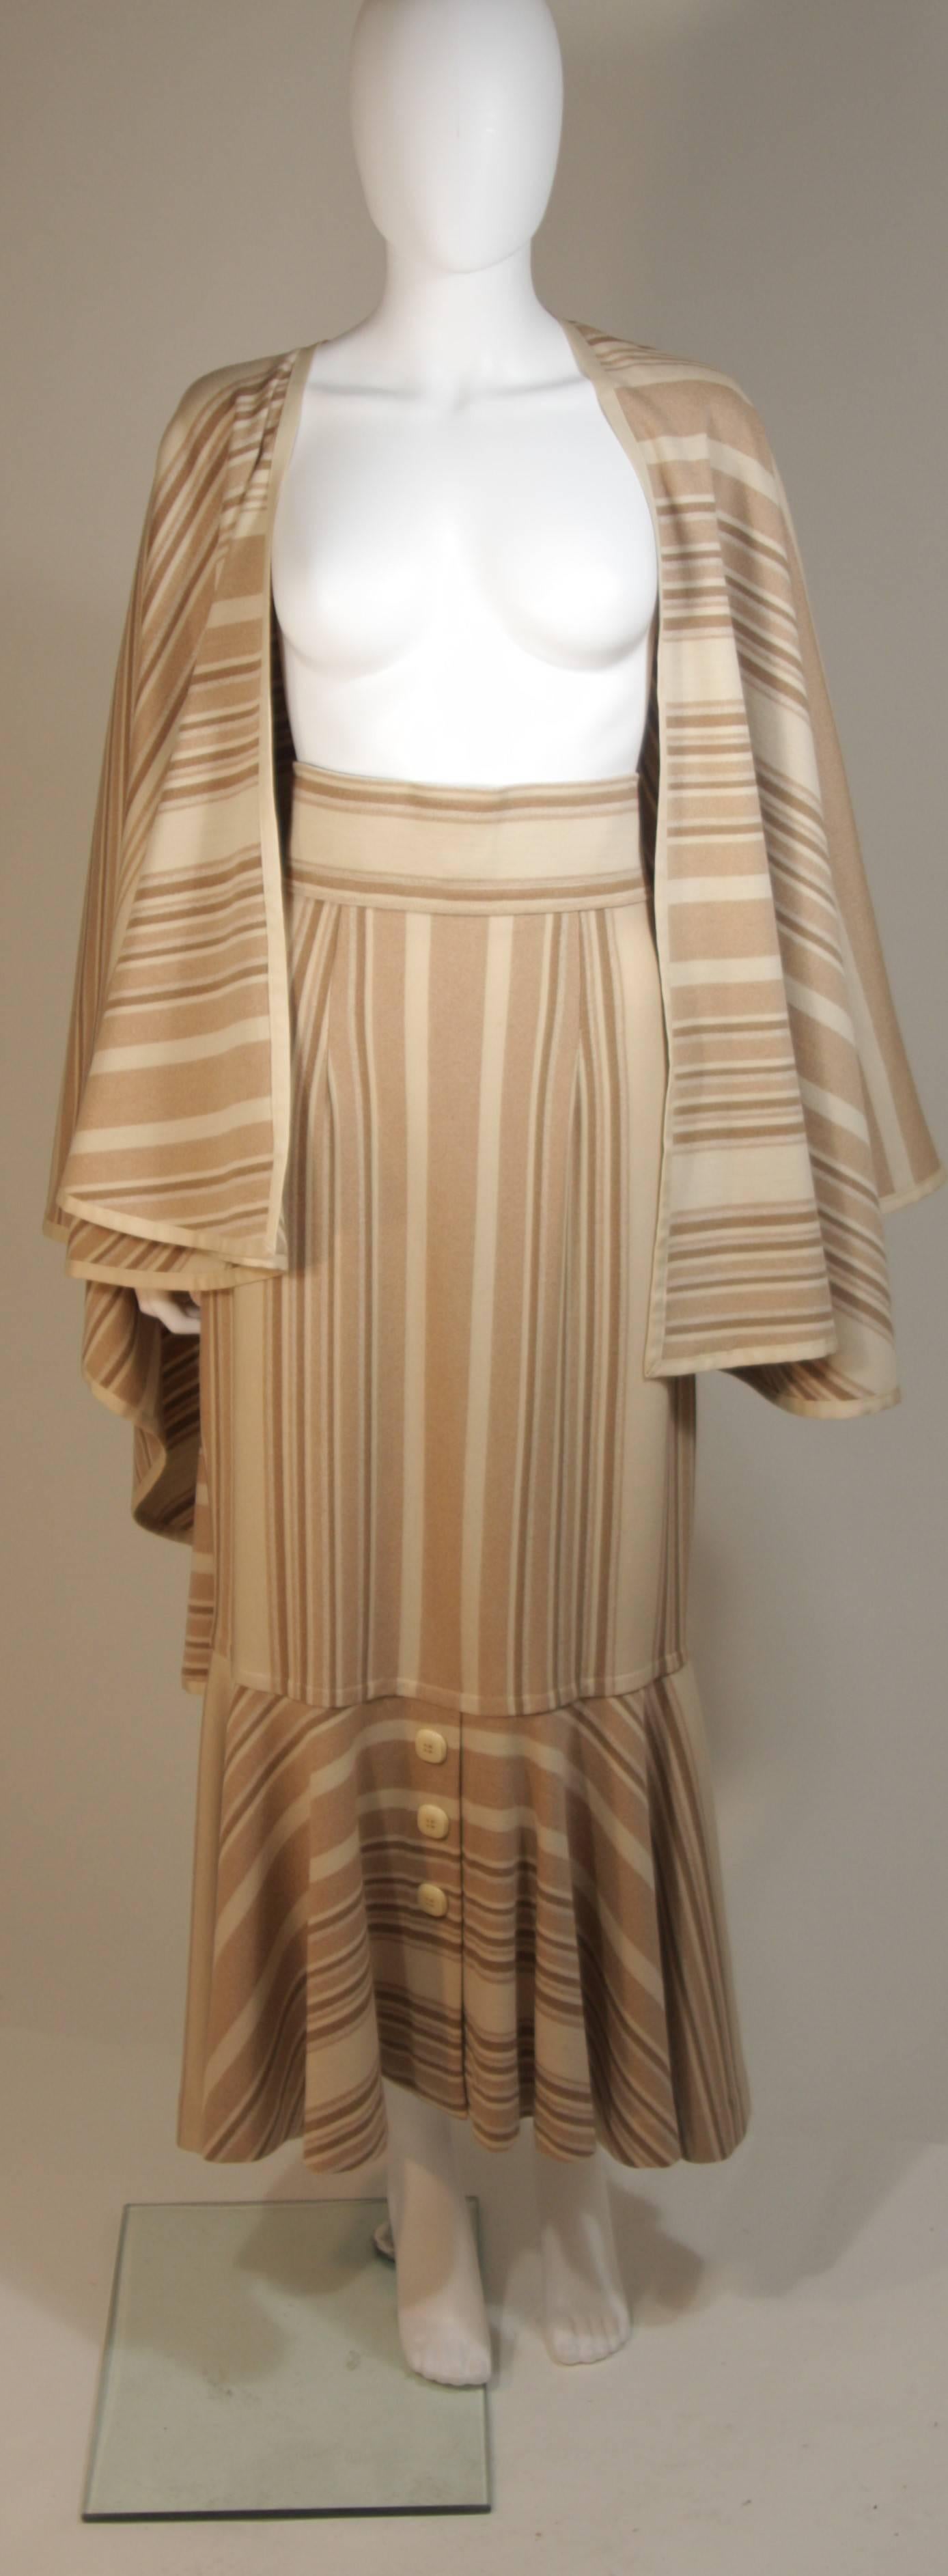 This custom 1960's ensemble is composed of a wonderful wool in beige, nude, and cream hues. The cape features an open style and the skirt has a center back zipper closure with center front button accents at the flared hem. In excellent vintage